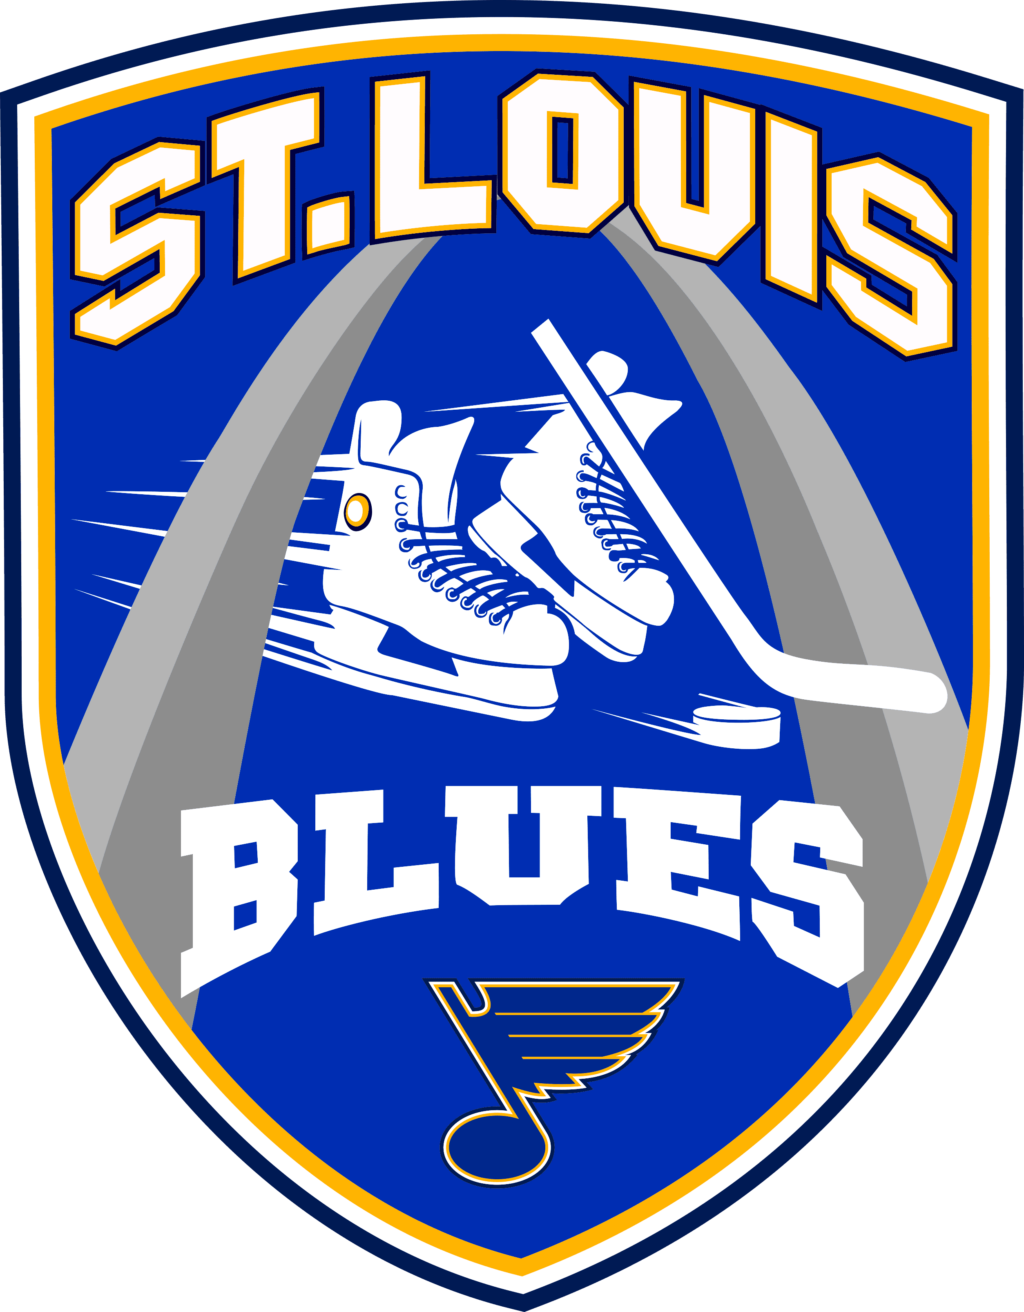 slb 12 NHL St. Louis Blues, St. Louis Blues SVG Vector, St. Louis Blues Clipart, St. Louis Blues Ice Hockey Kit SVG, DXF, PNG, EPS Instant download NHL-Files for silhouette, files for clipping.